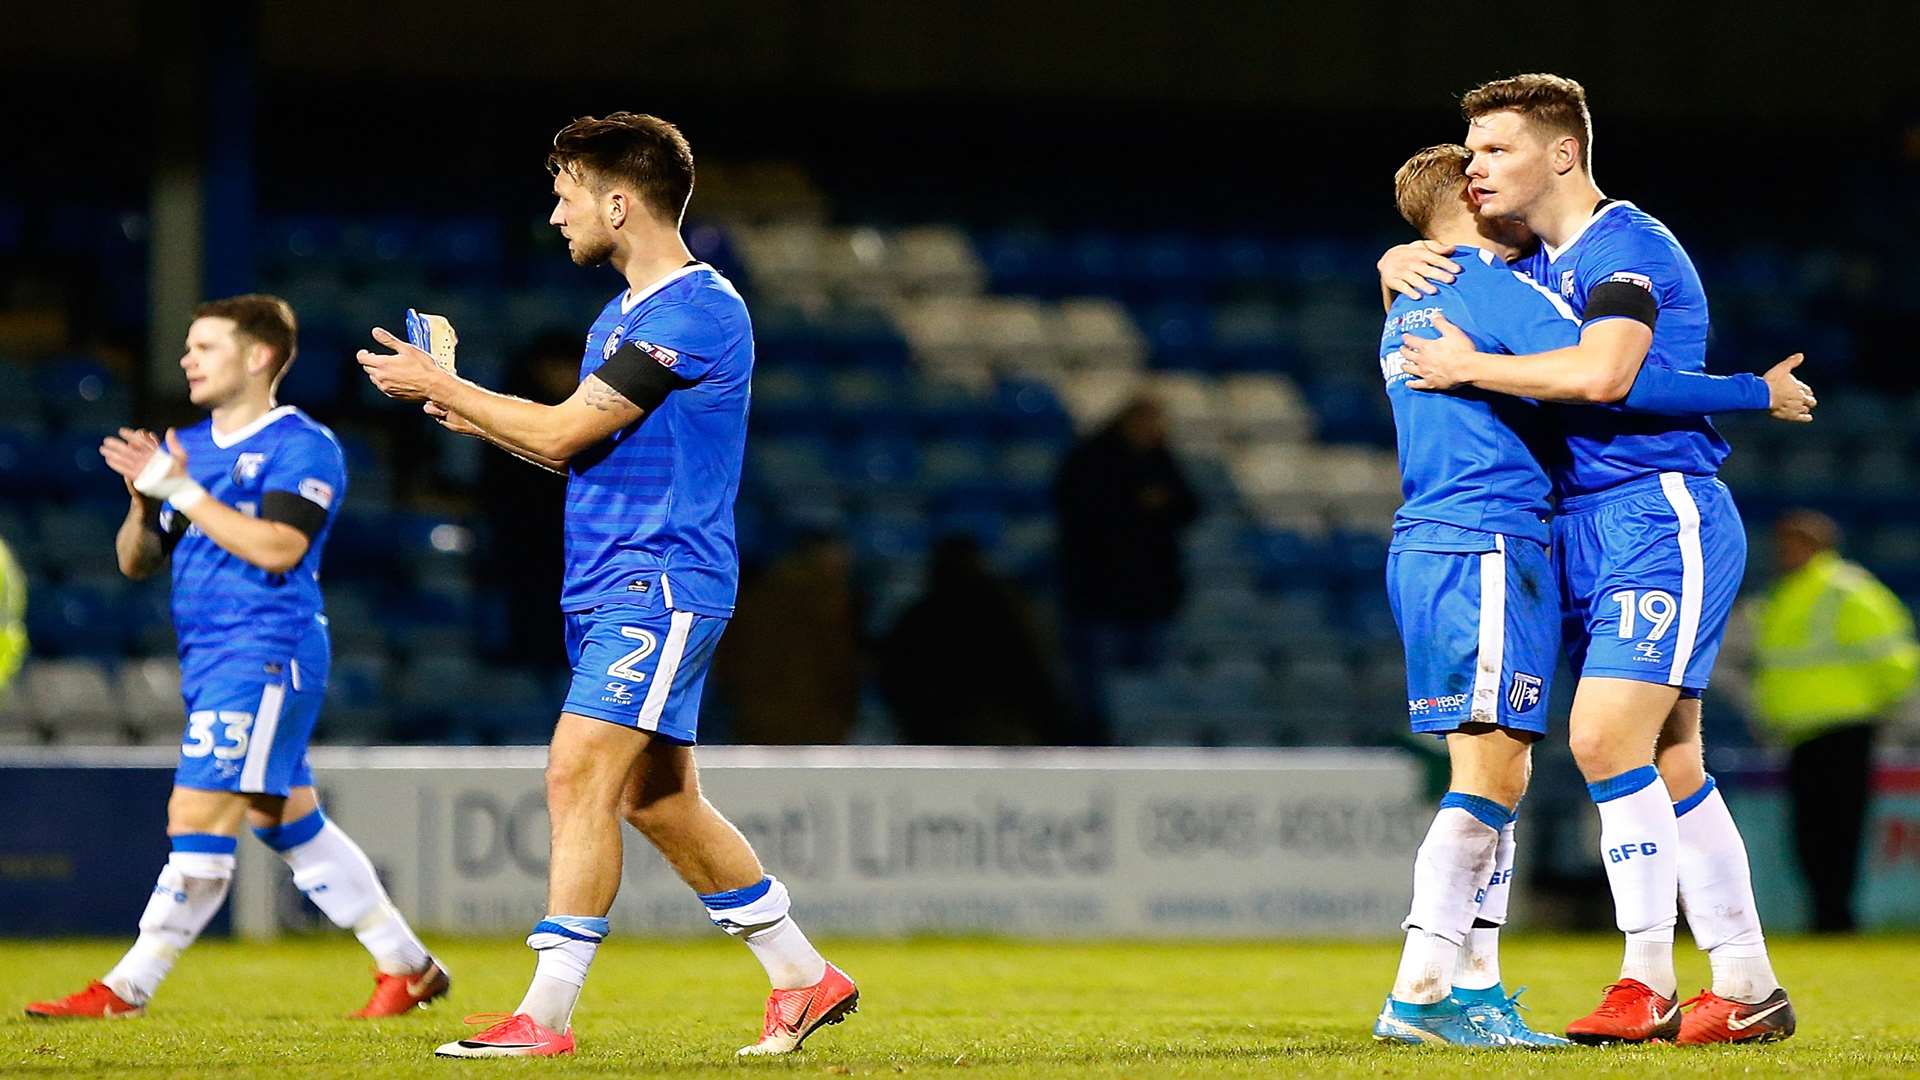 The players celebrate an impressive win at full time Picture: Andy Jones